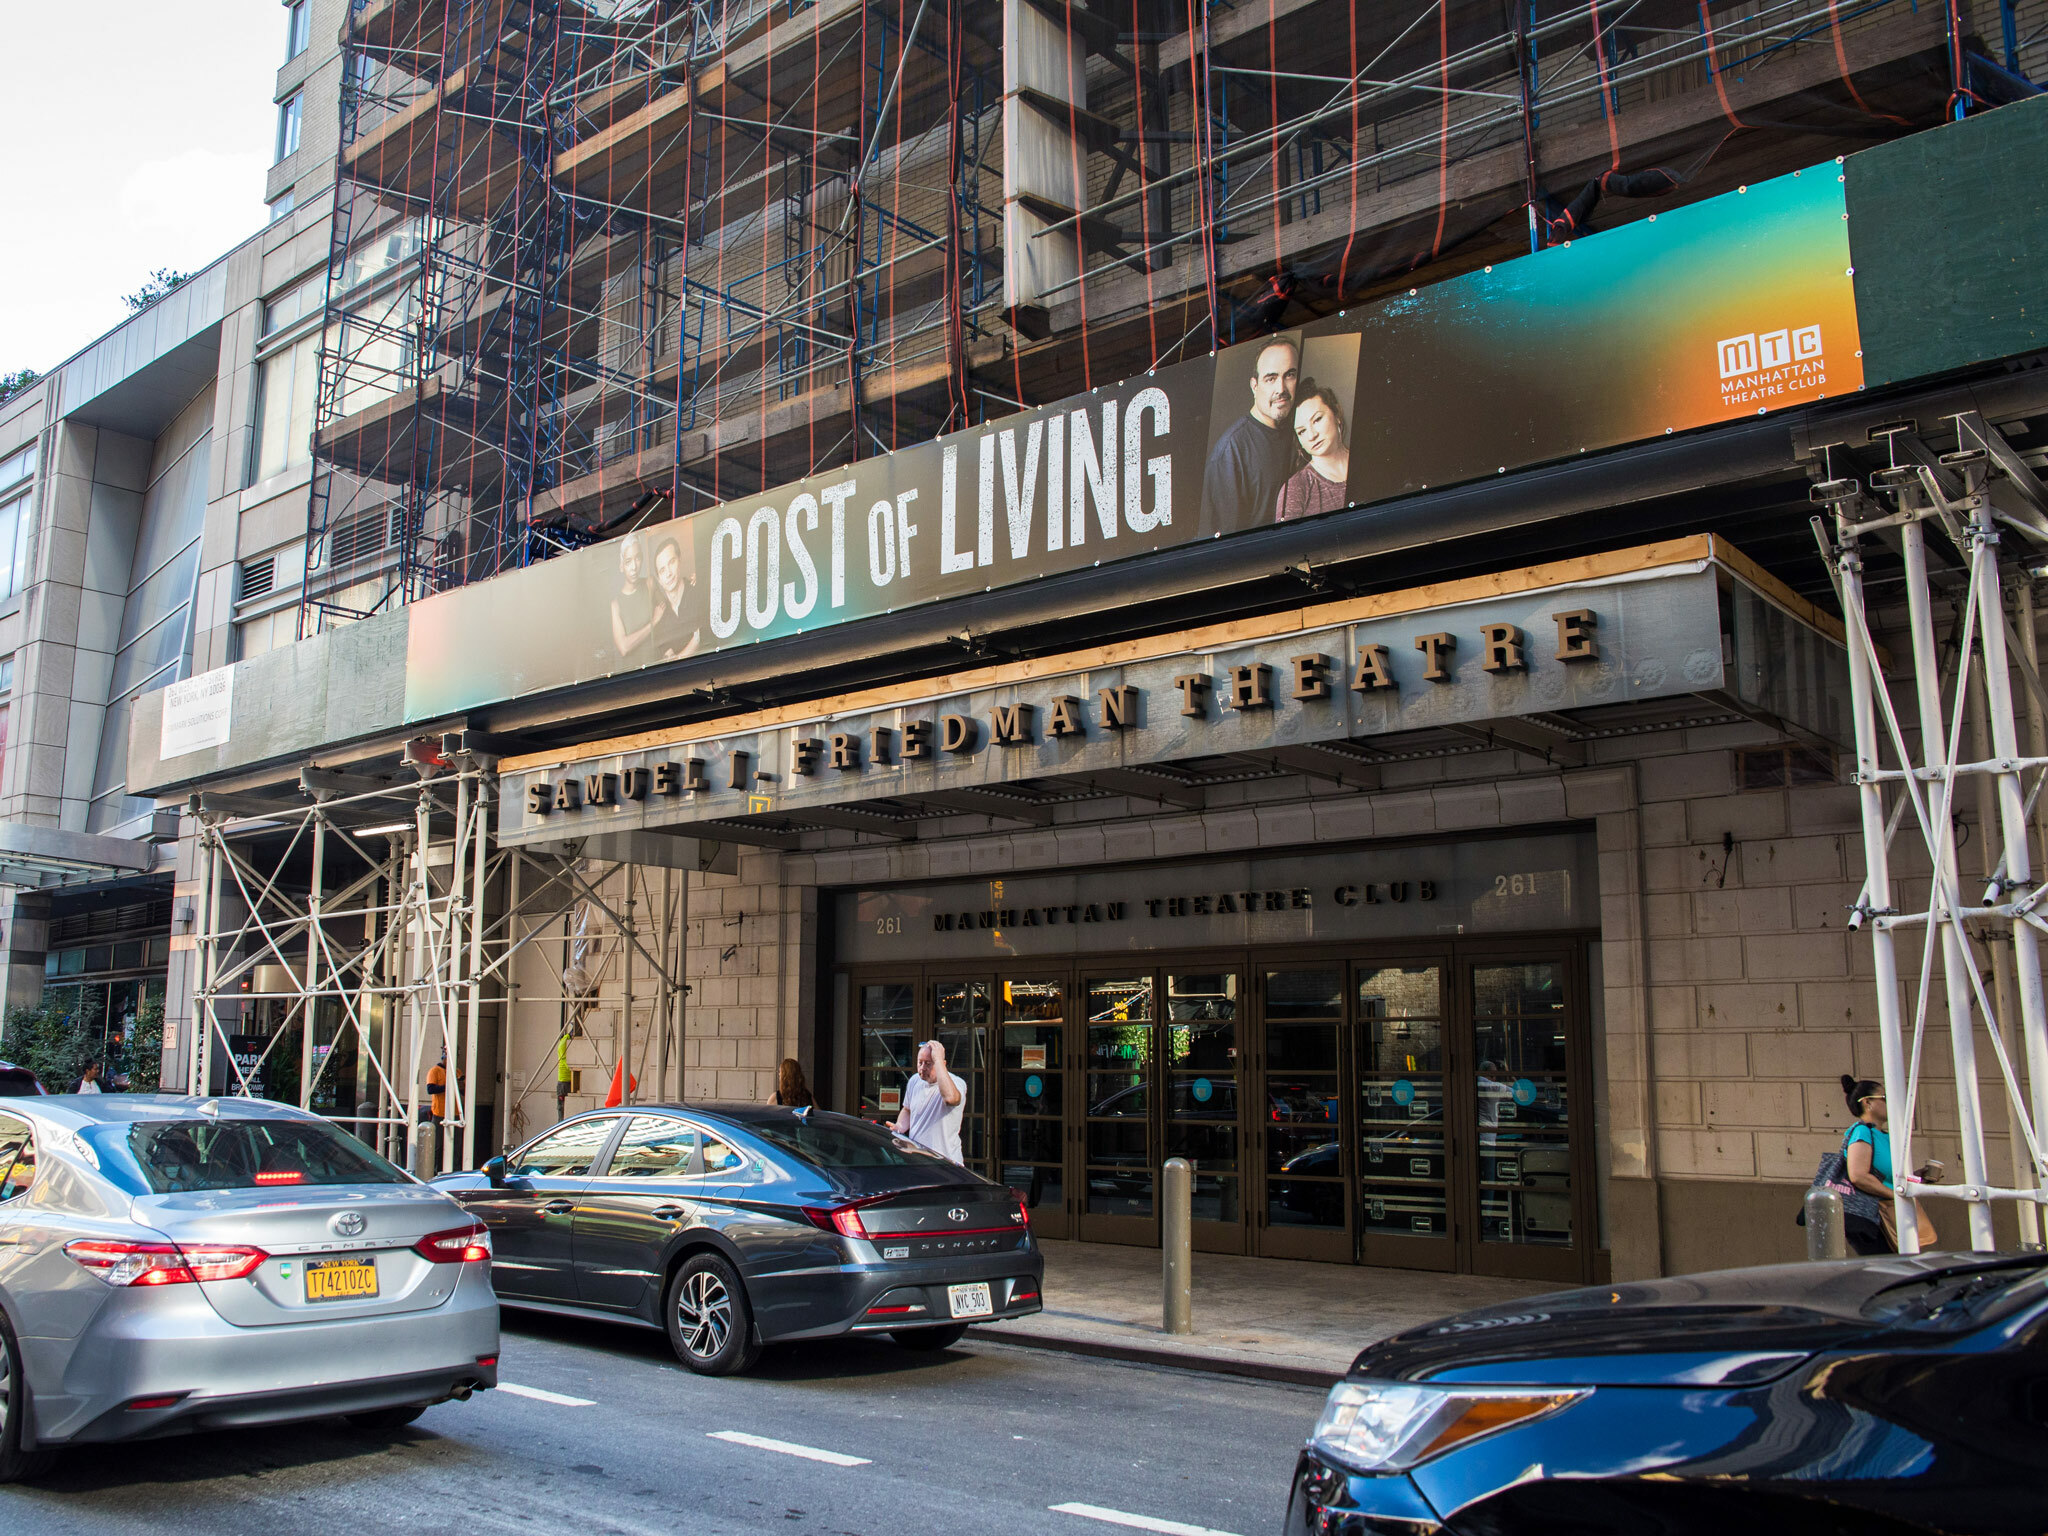 Cost of Living Marquee